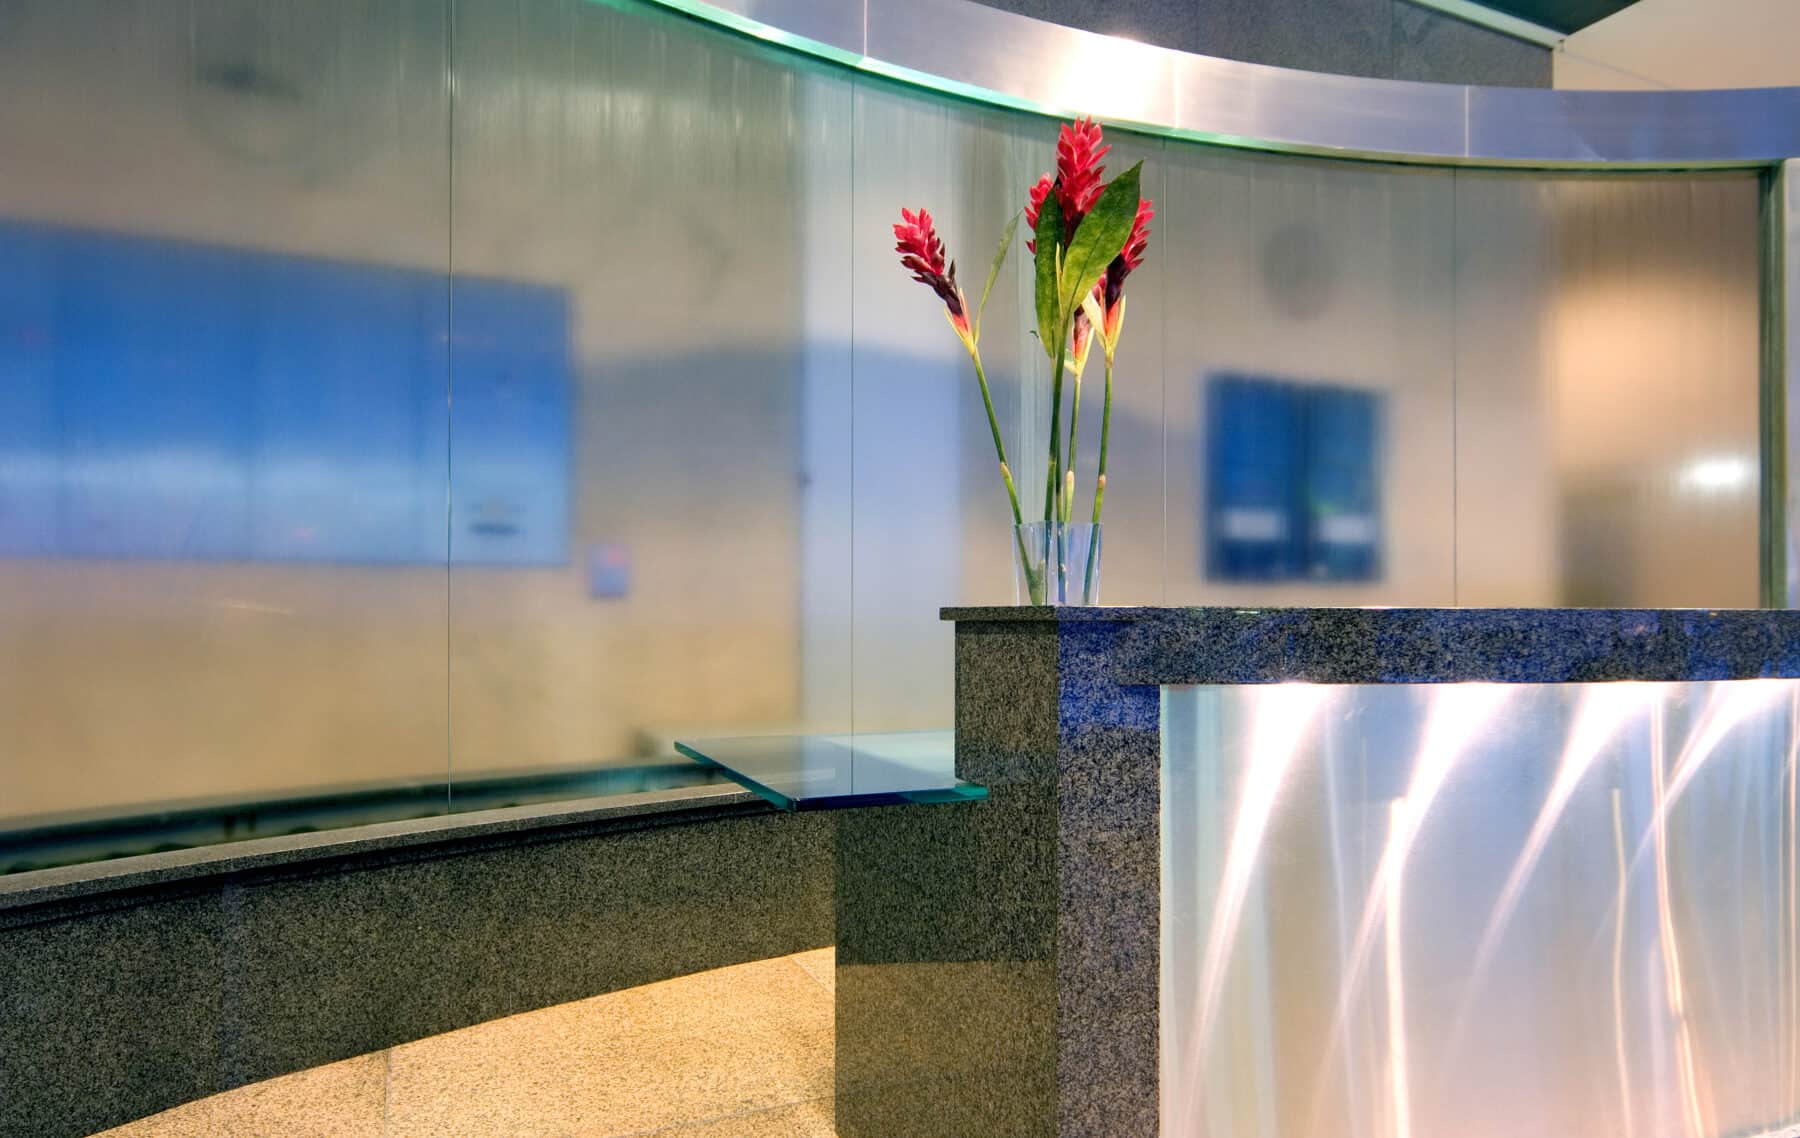 Custom Fabrication of Architectural Stainless Steel Metal, Granite and Glass Curved Water Feature from Construction Specialty Projects by Commercial Builder & General Contractor Structural Enterprises